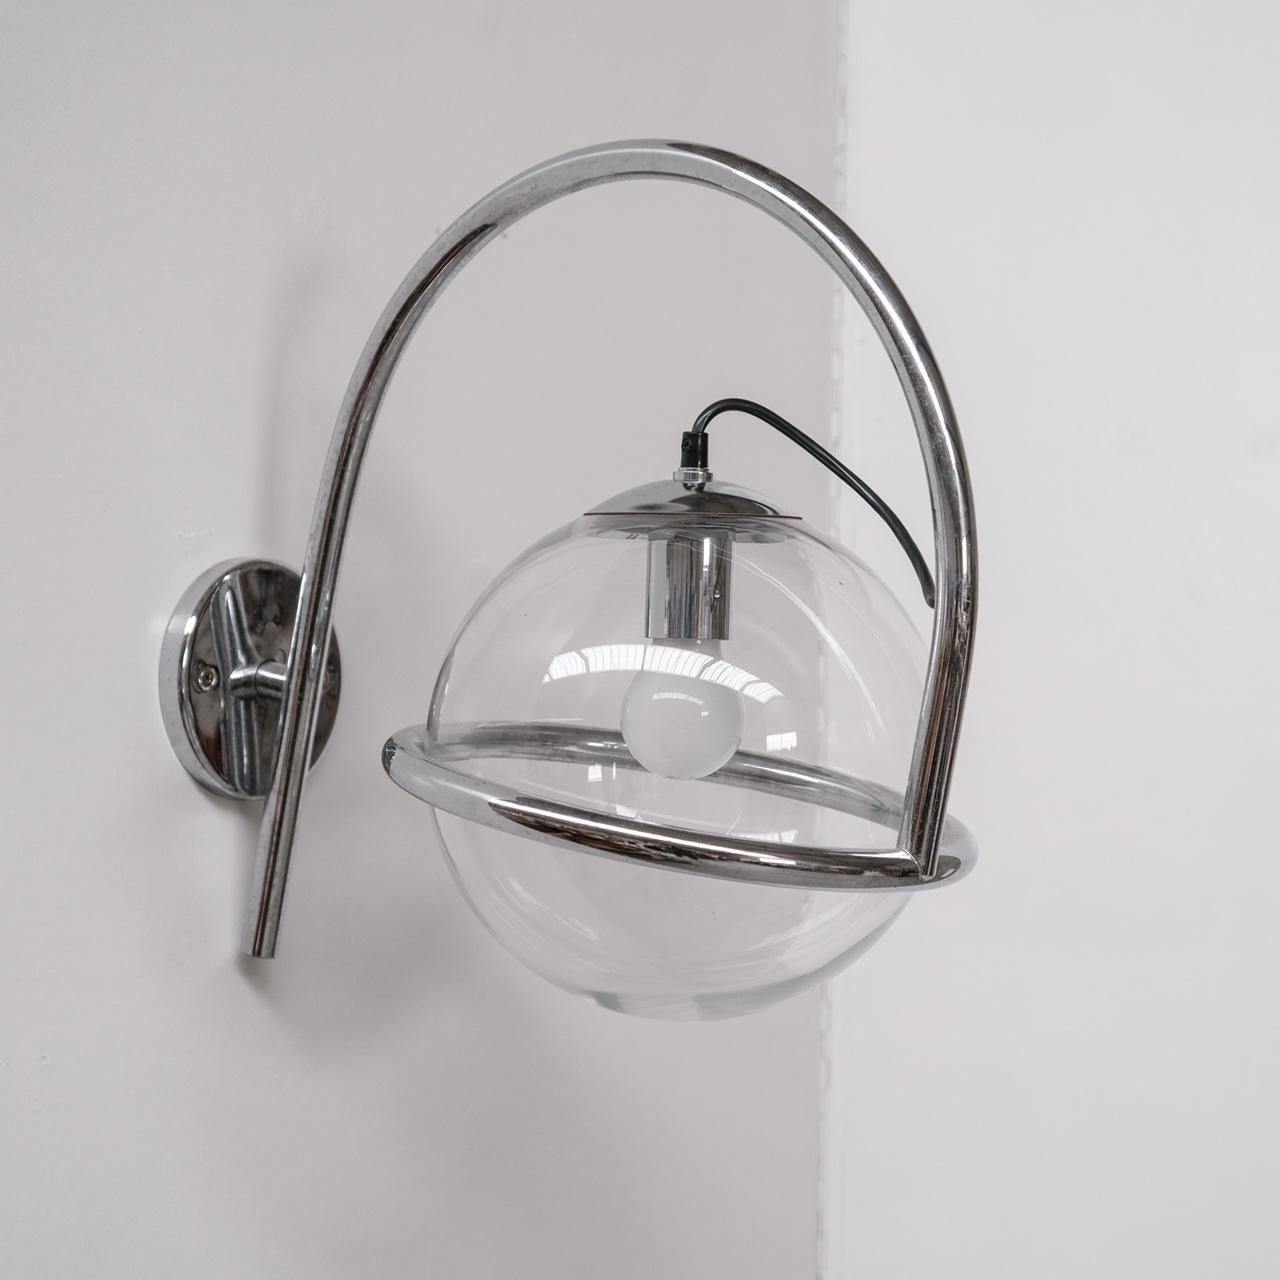 Chrome arm wall light, hosting a clear glass globe shade.

German, circa 1970s.

By Kinkeldey.

THREE AVAILABLE. PRICED AND SOLD INDIVIDUALLY.

Since re-wired and PAT tested.

Location: Belgium Gallery.

Dimensions: 40 H x 28 W x 47 D in